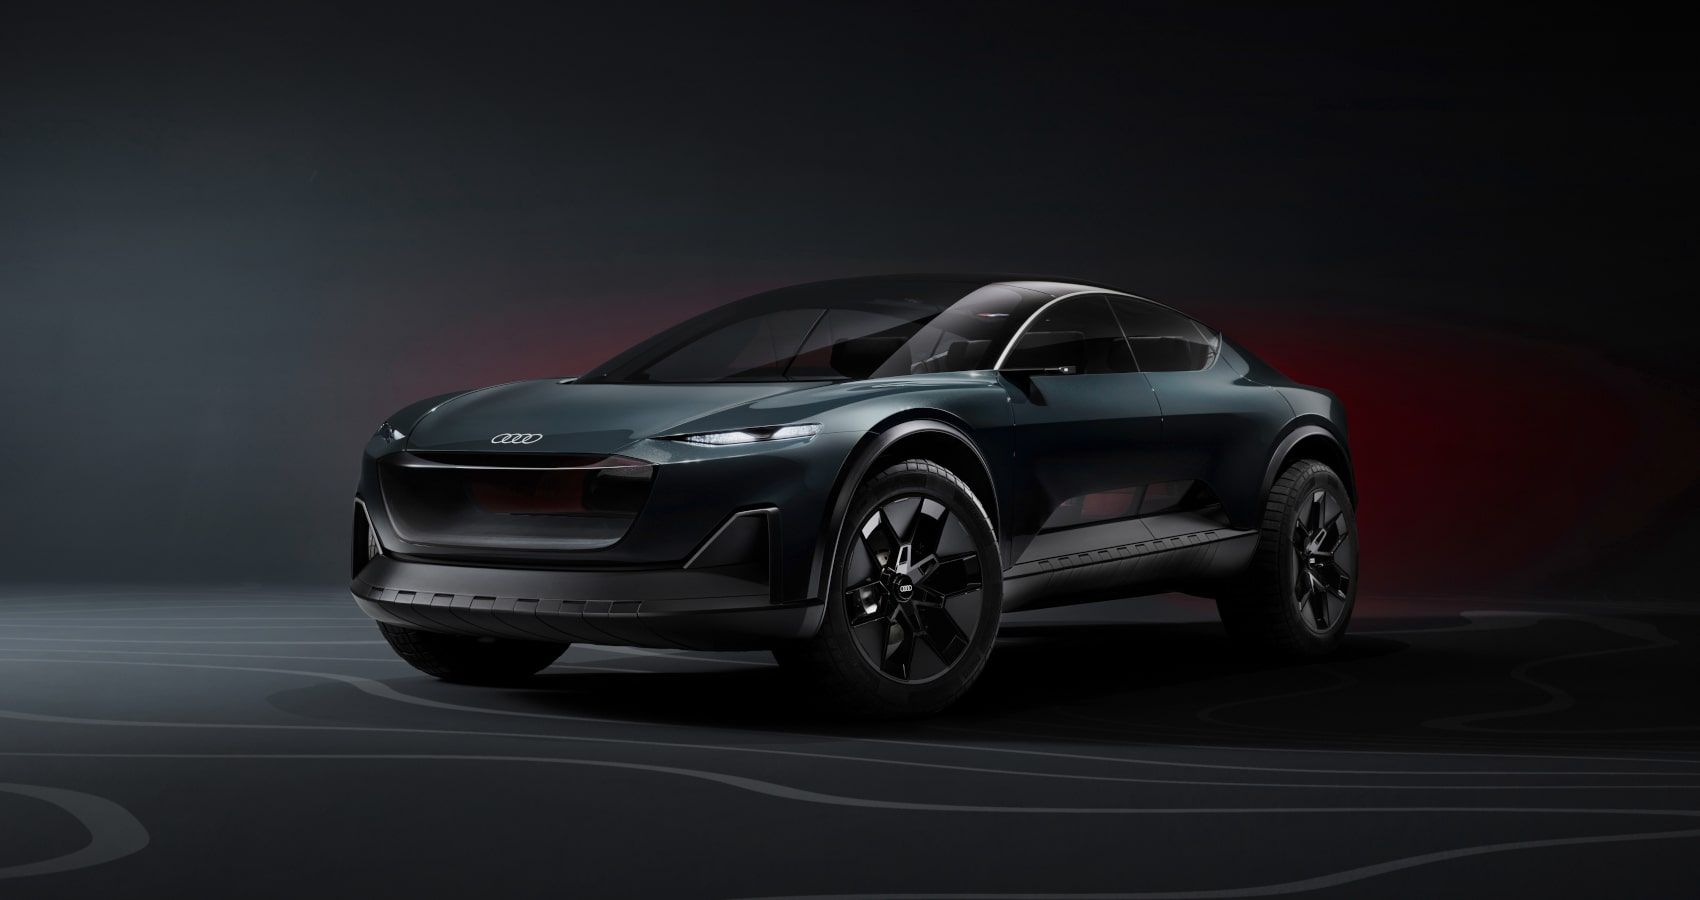 Audi Activesphere Concept Car in black and red background